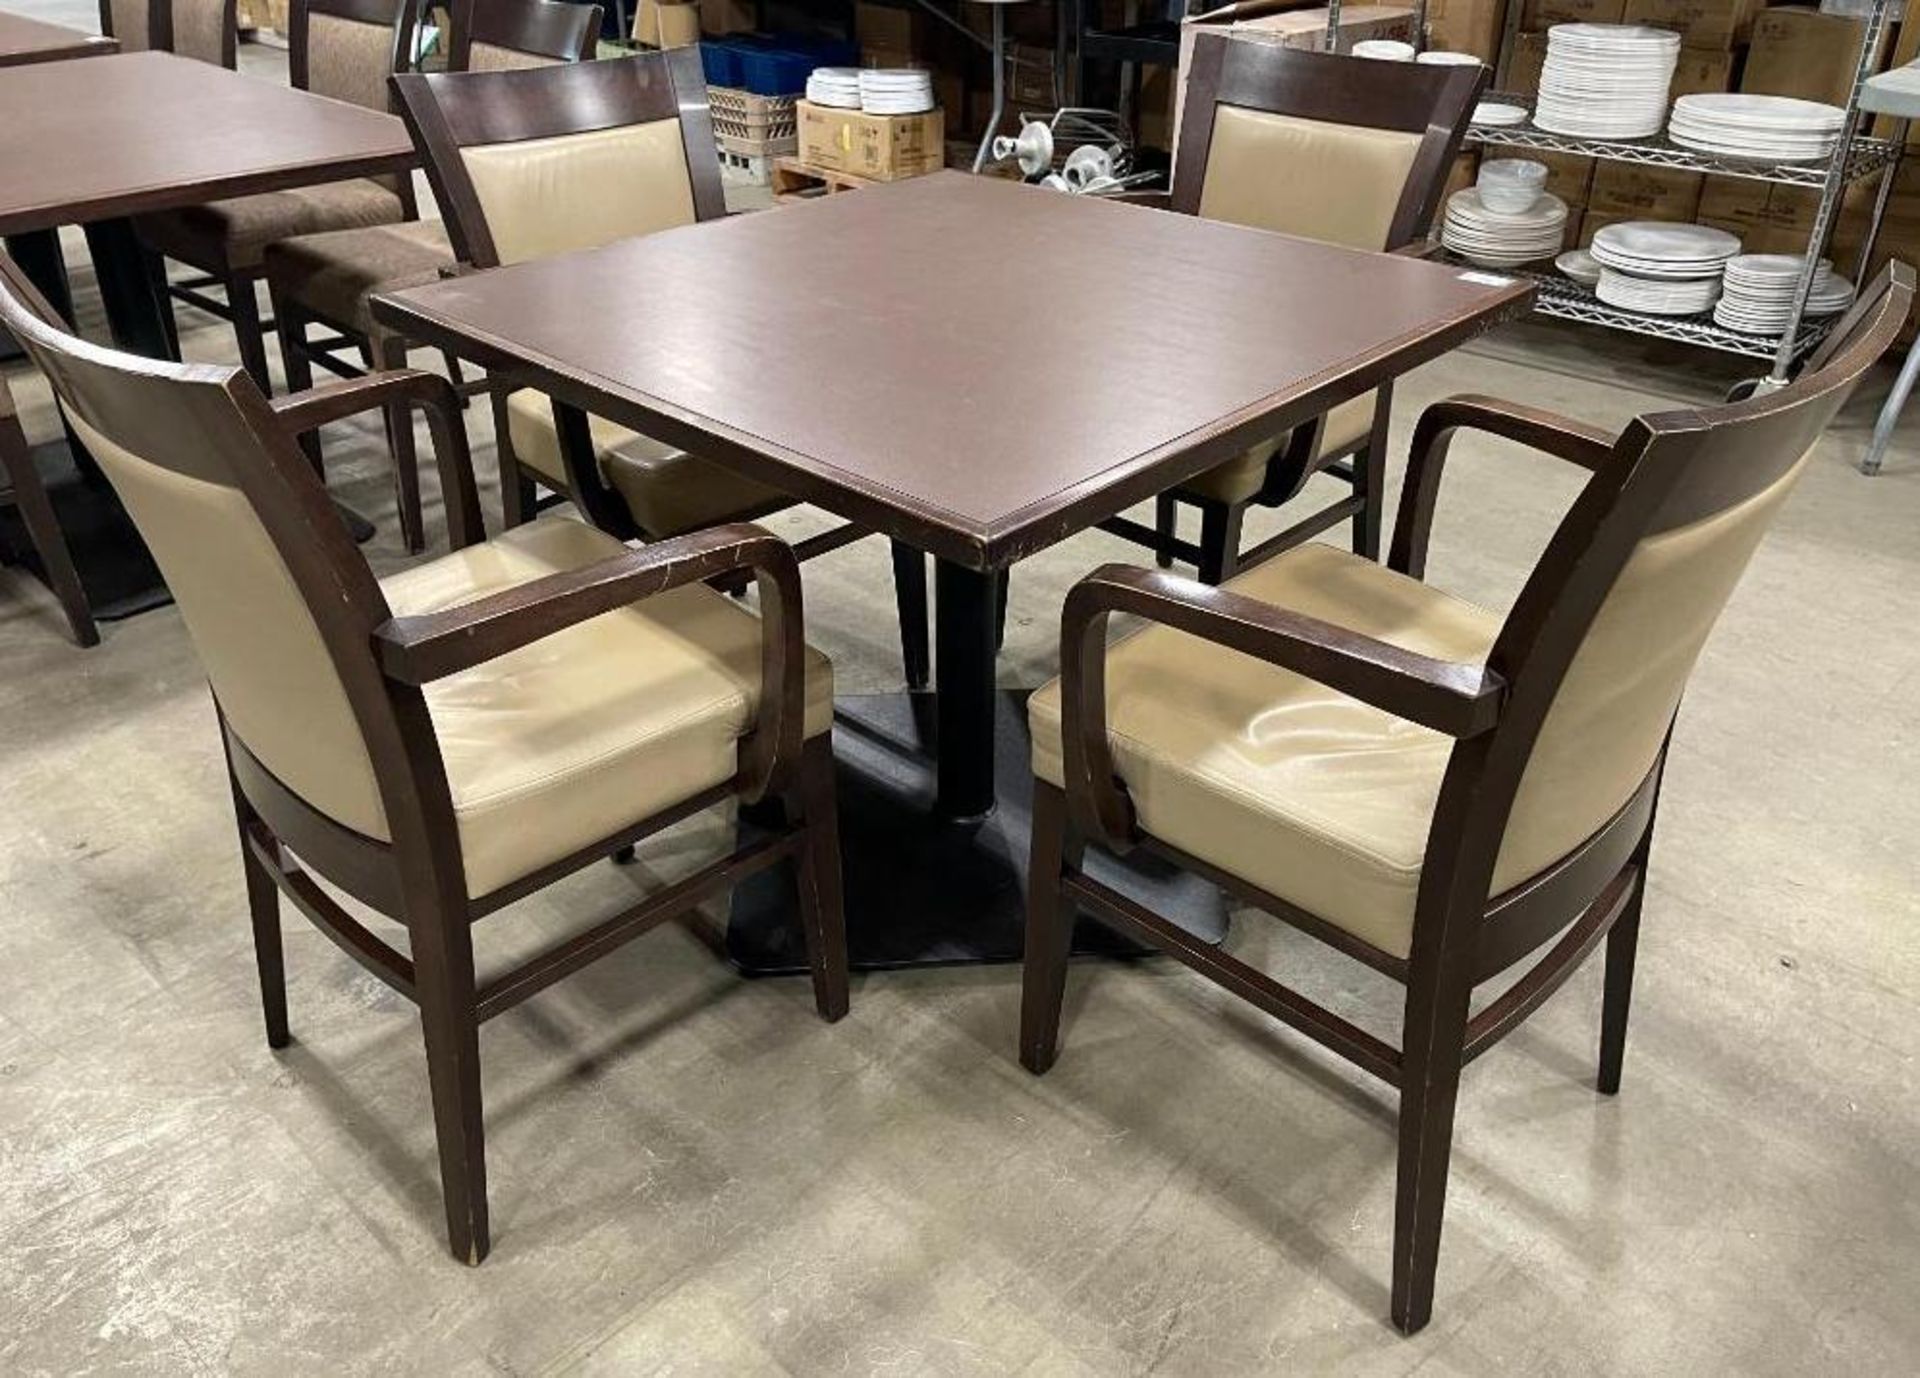 36" X 36" SINGLE PEDESTAL DINING TABLE WITH (4) ADRIA MICHELLE ARM CHAIRS - Image 5 of 5